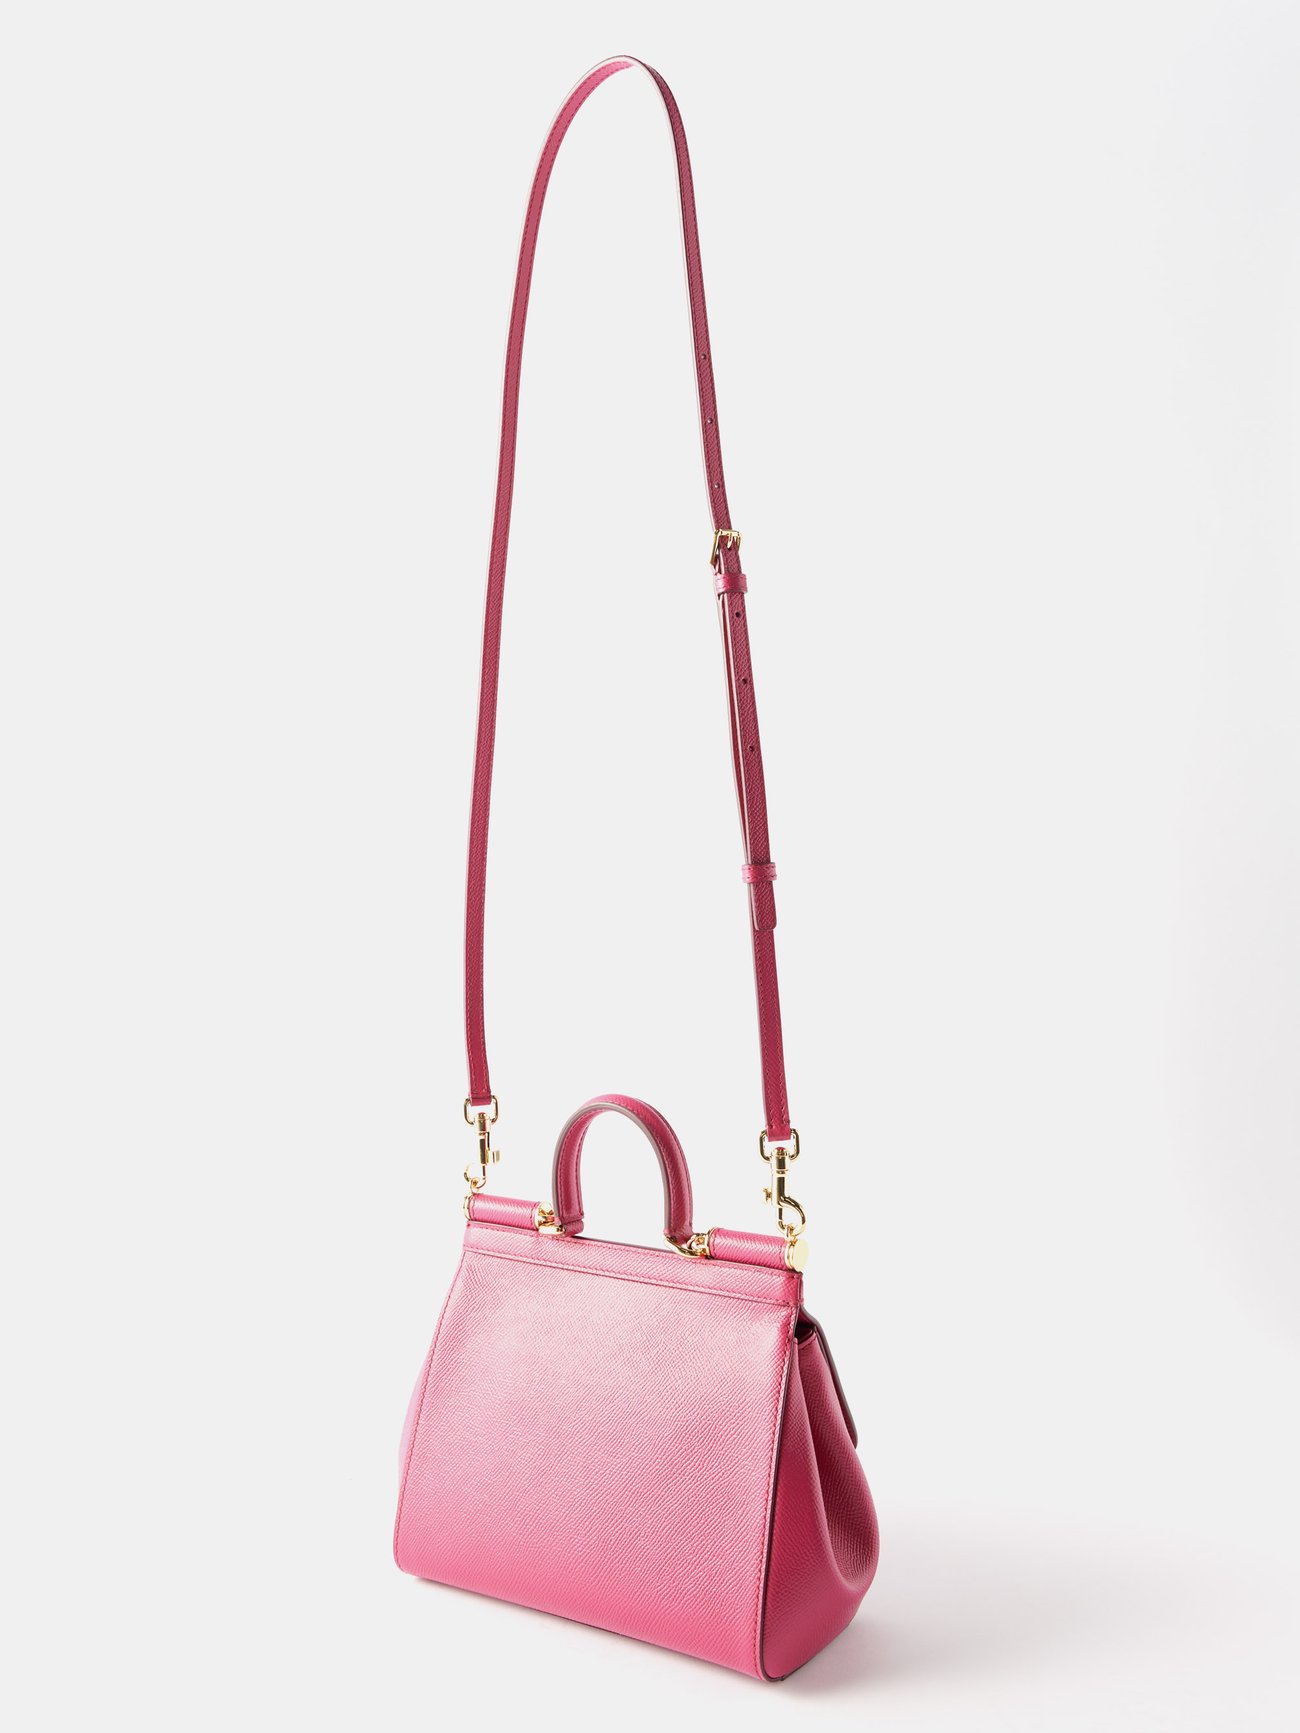 Dolce & Gabbana Sicily Small Leather Tote - Pink